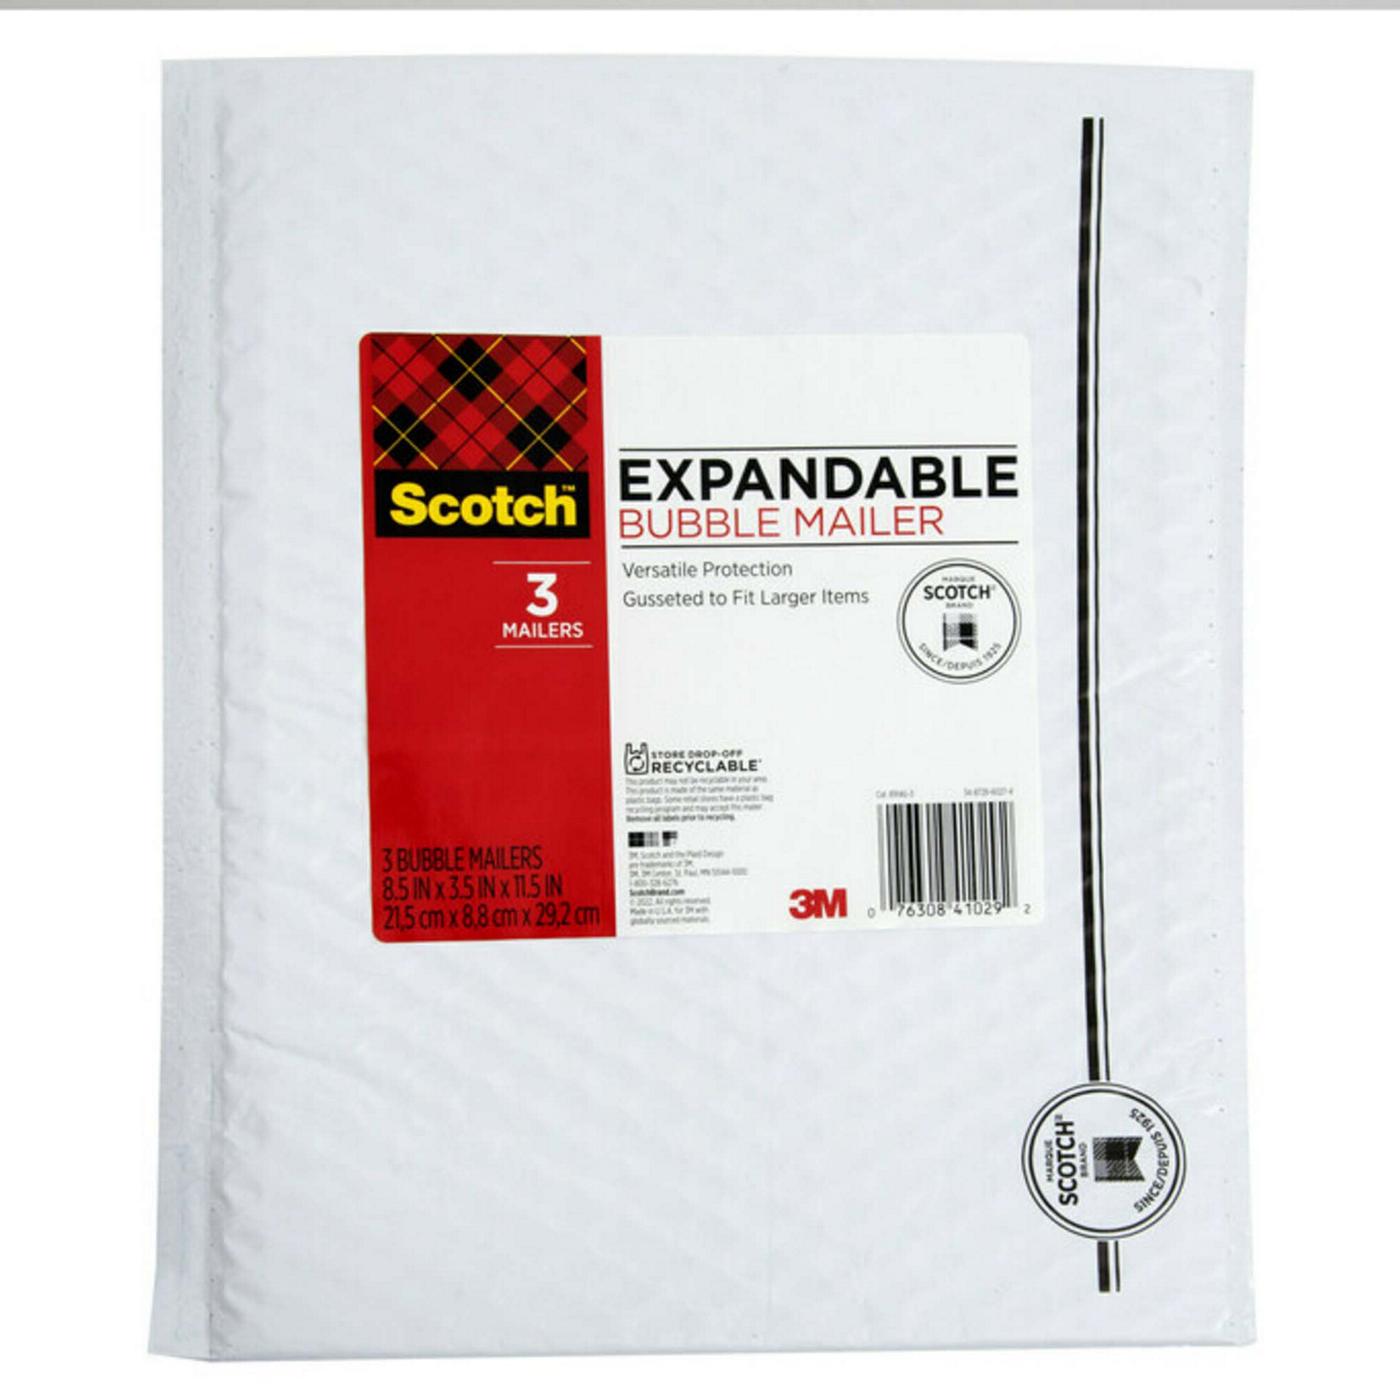 Scotch Expandable Bubble Mailers, 3 Ct; image 1 of 3